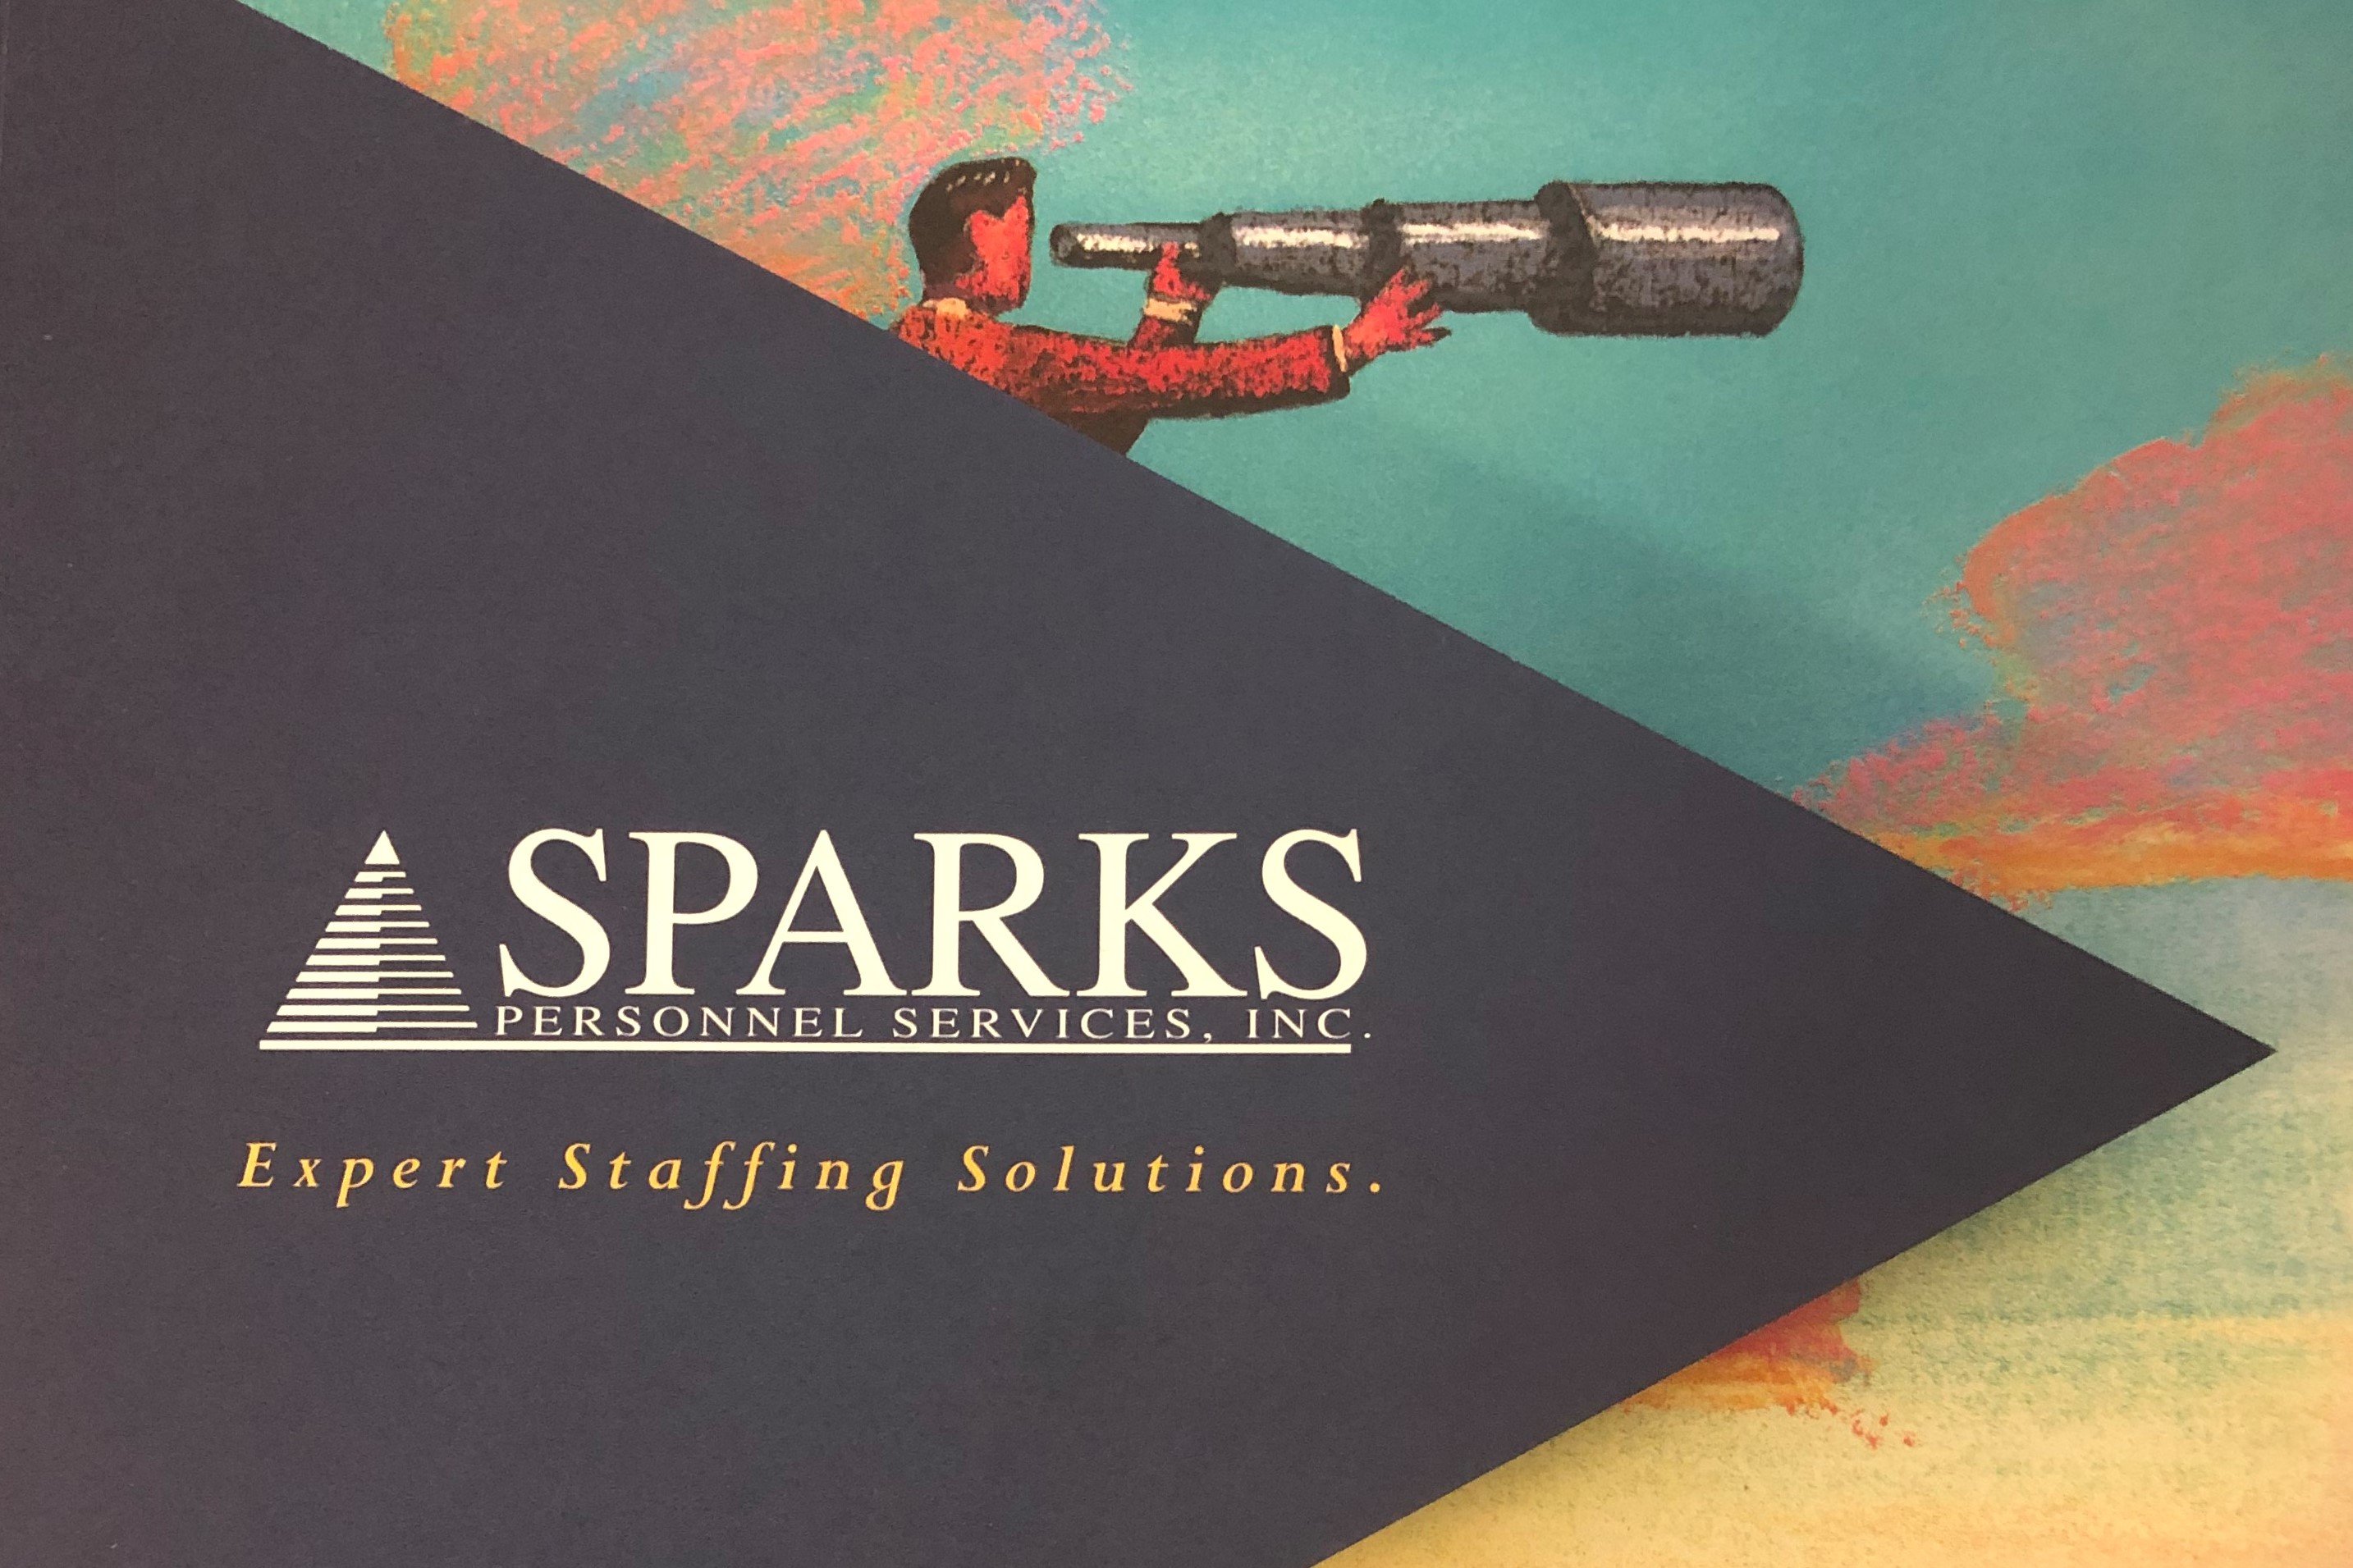 Sparks Group offers resource management solutions